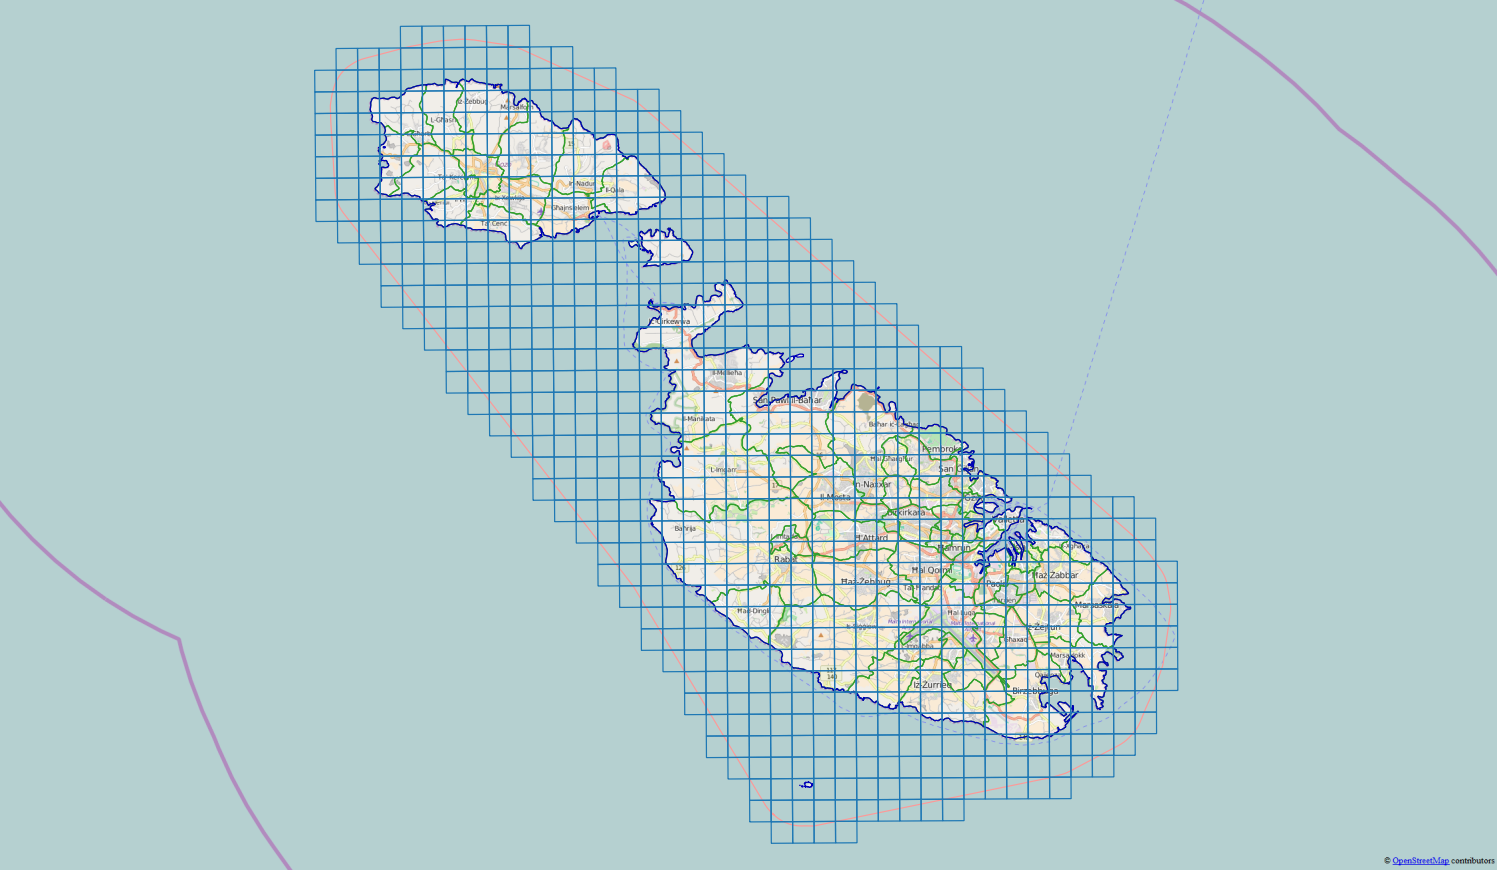 html imagemap created with QGIS